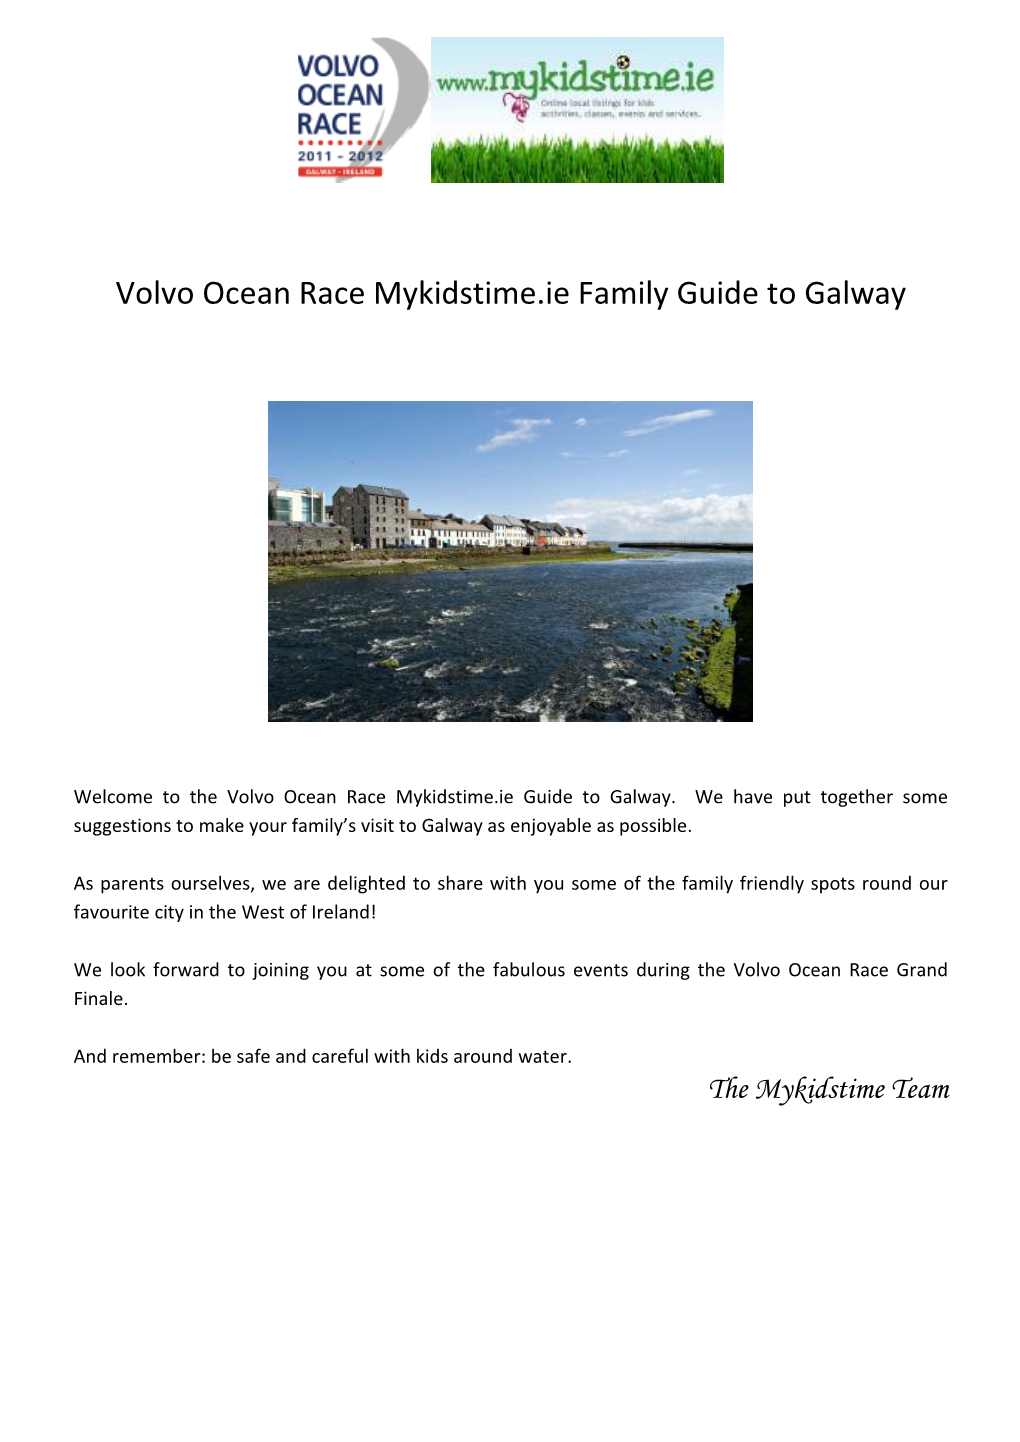 Volvo Ocean Race Mykidstime.Ie Family Guide to Galway